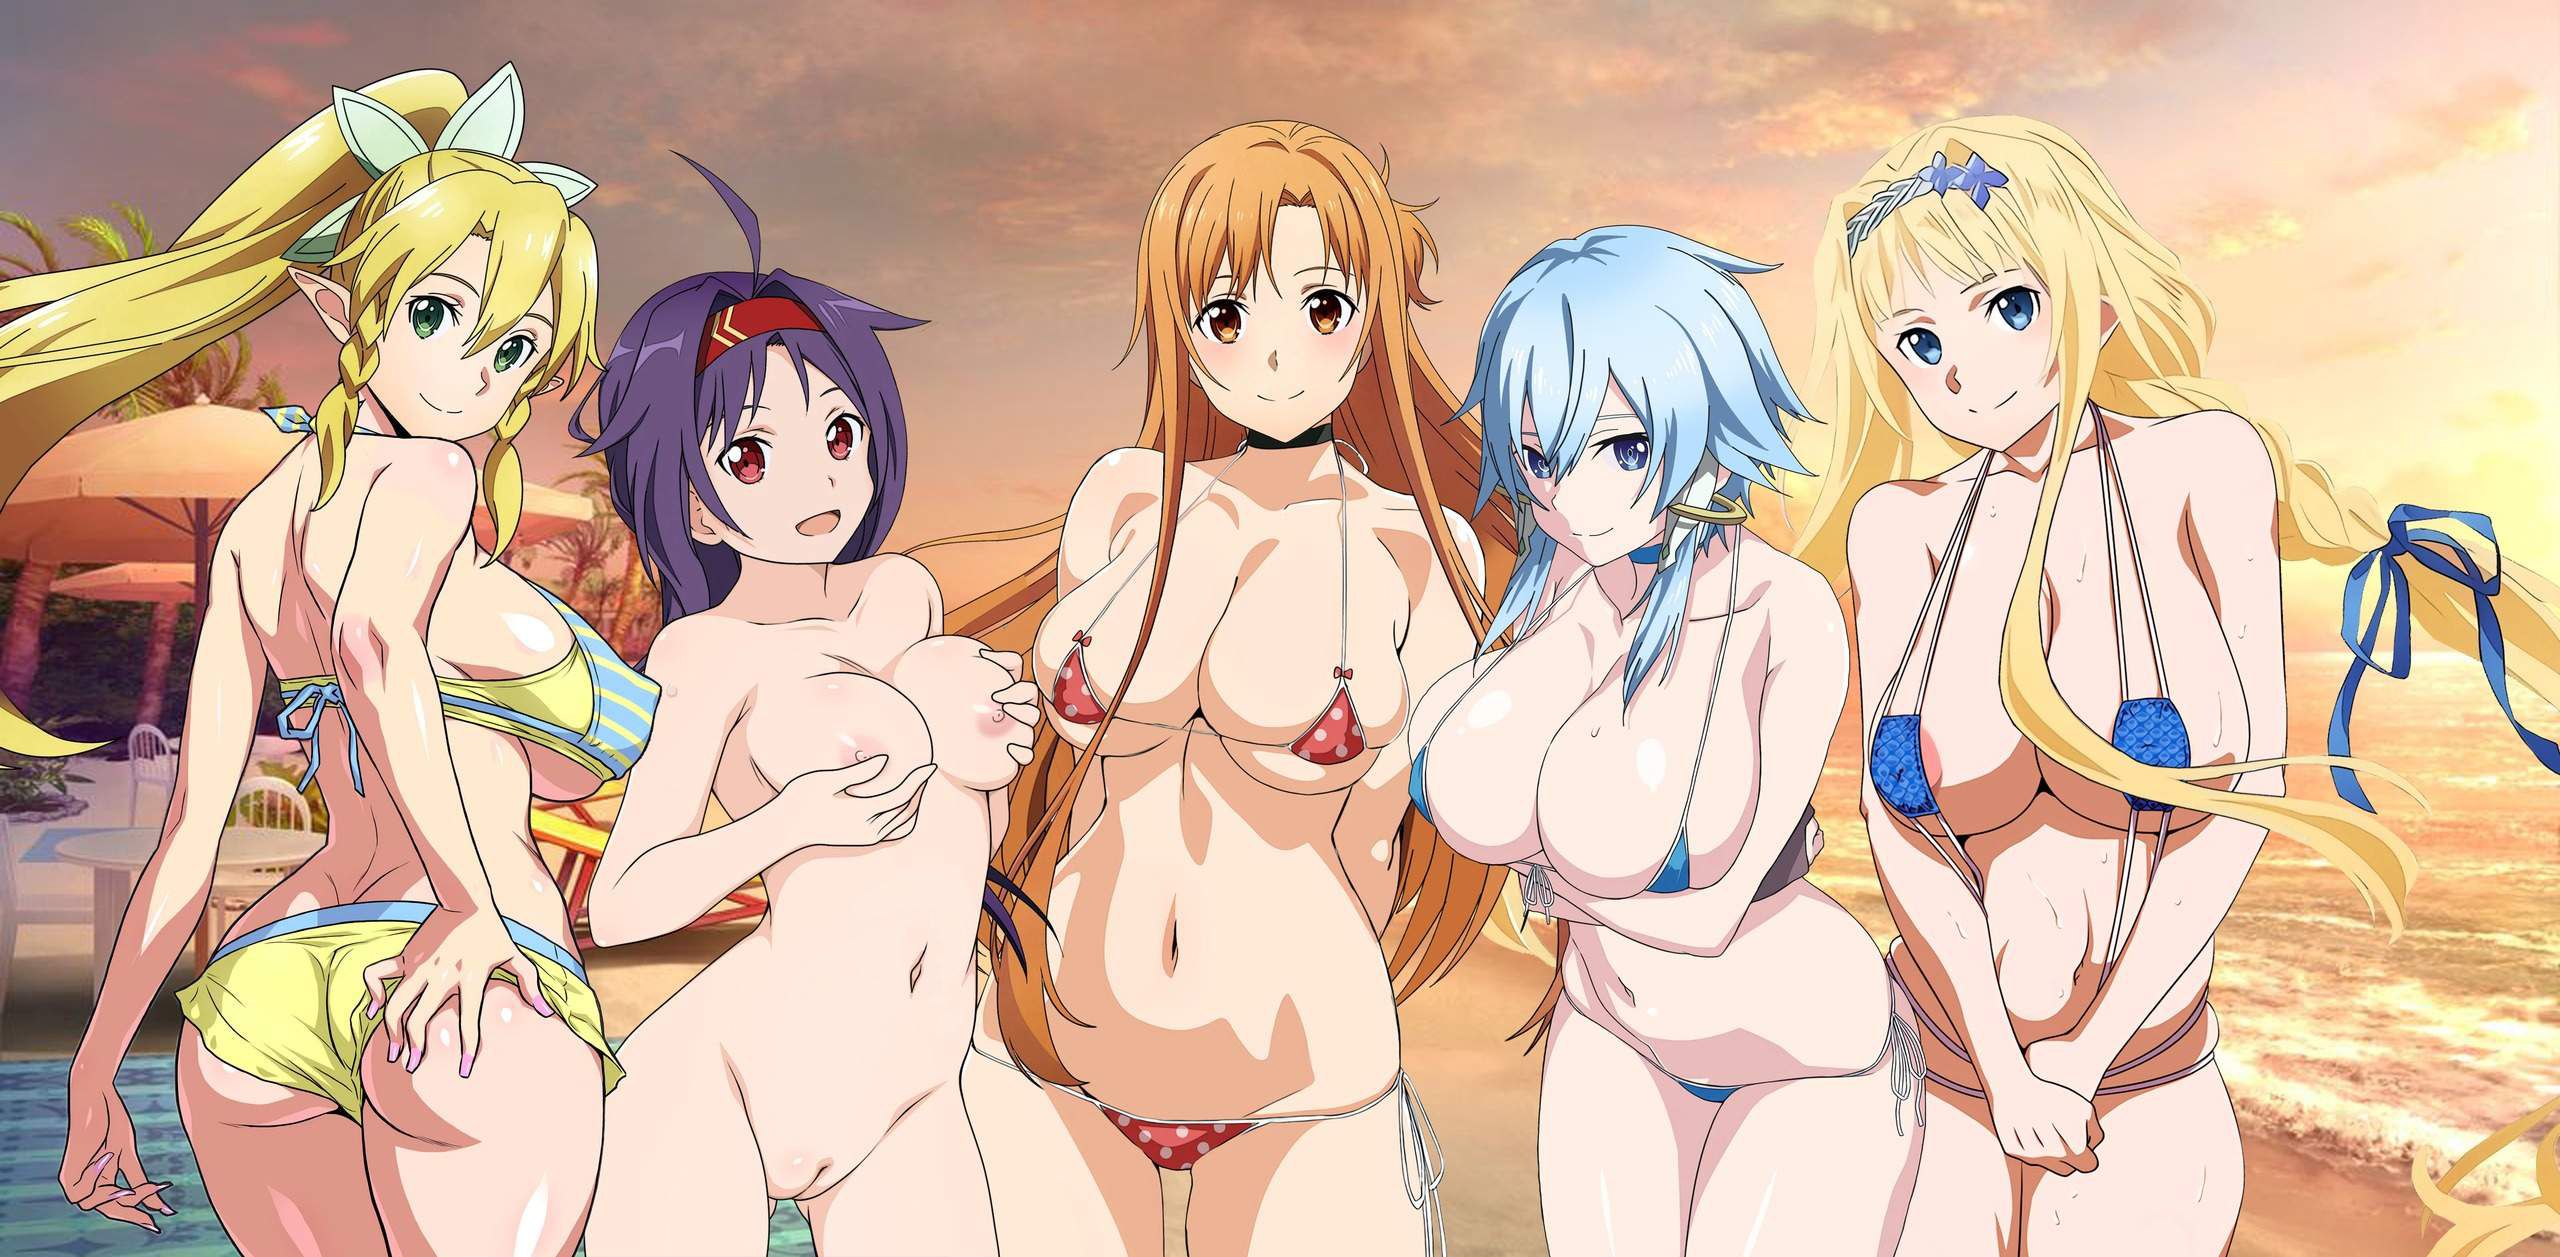 [Sword Art Online (SAO)] Erotic images such as Asuna-chan 75th 13